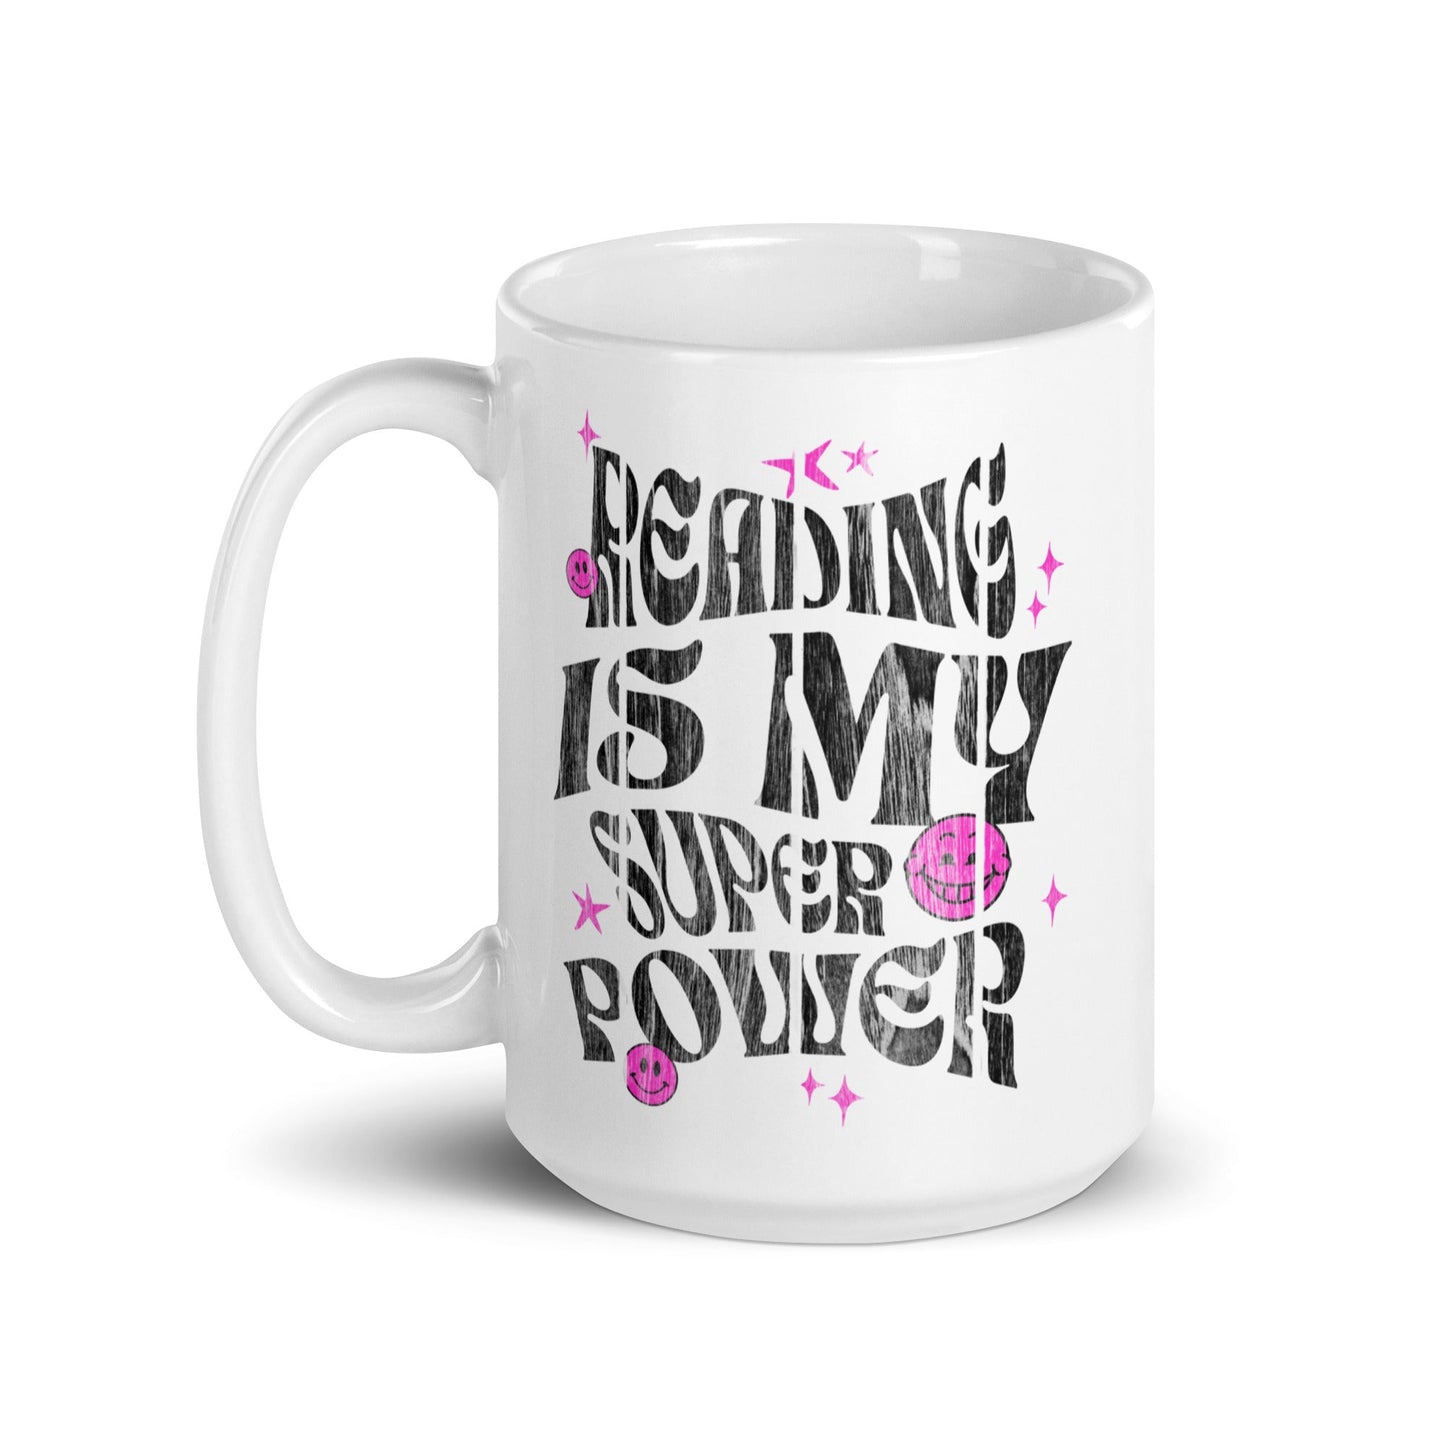 Reading Is My Superpower Mug